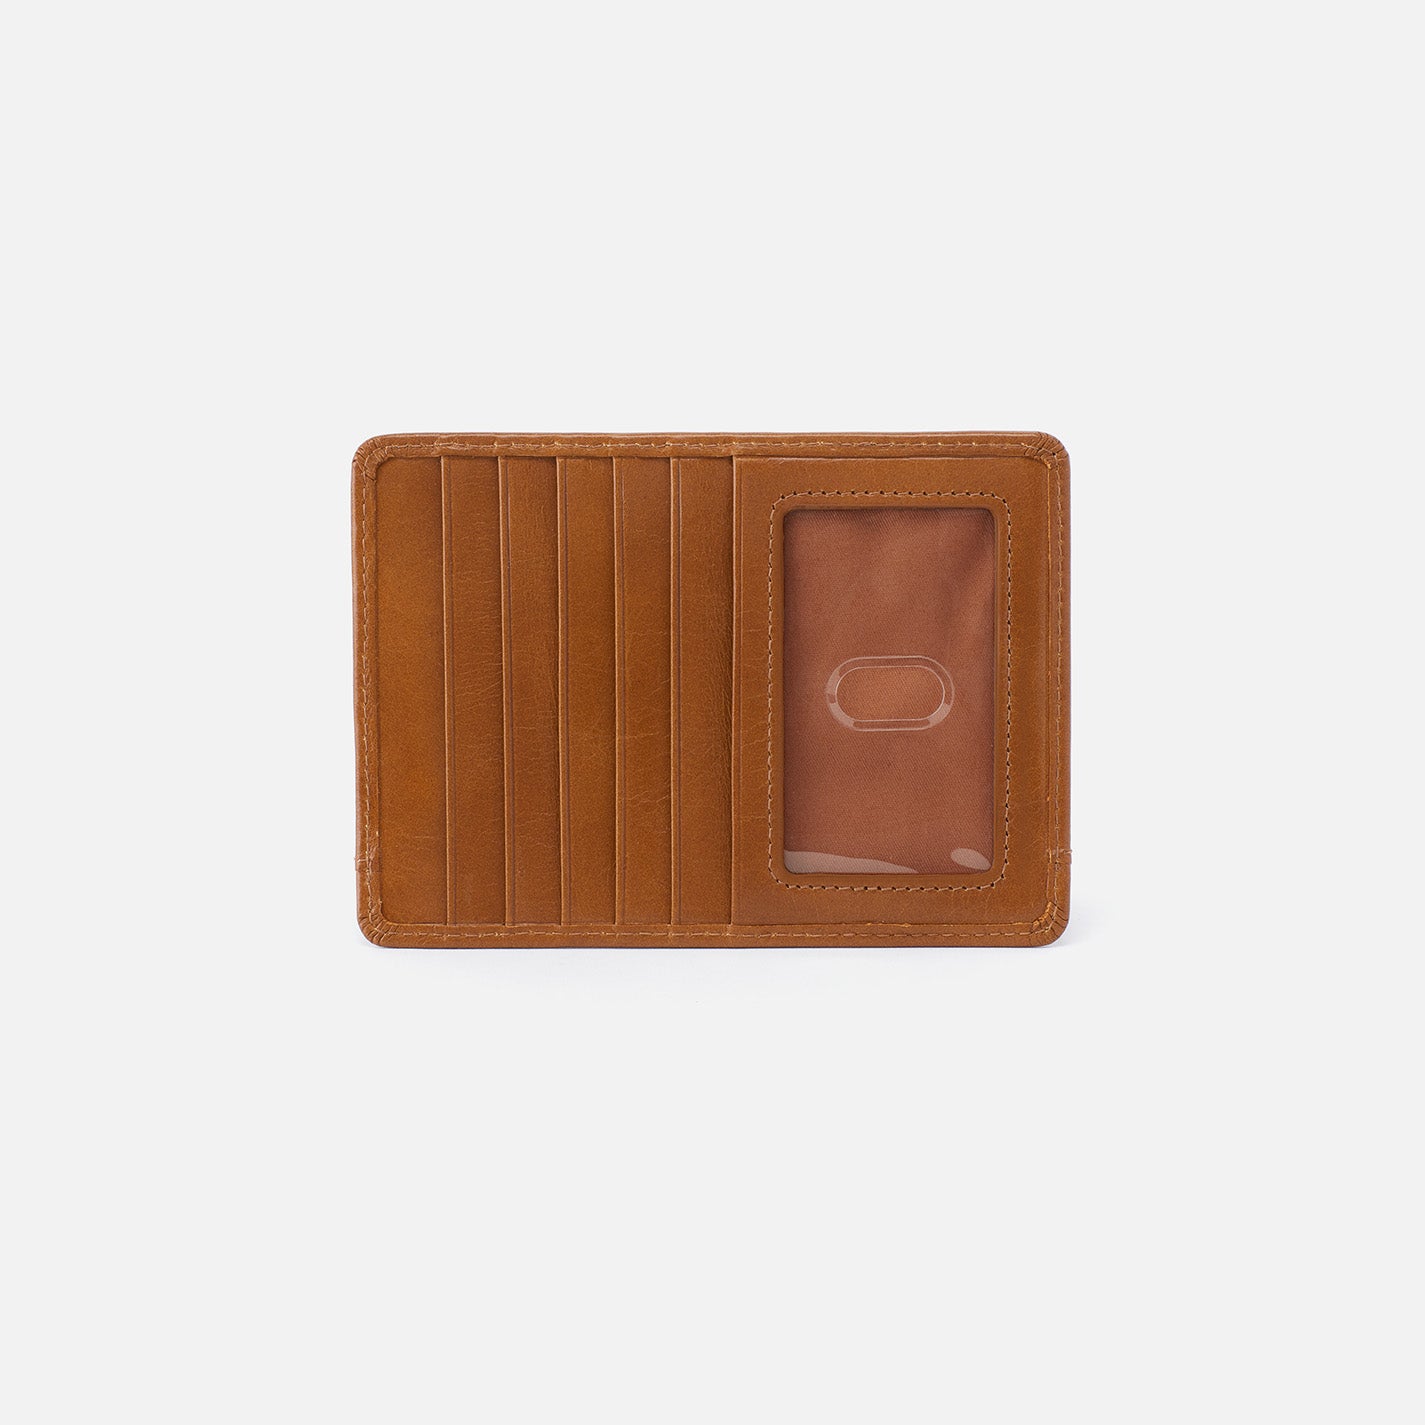 HOBO Vintage Hide Collection Max Leather Card Case